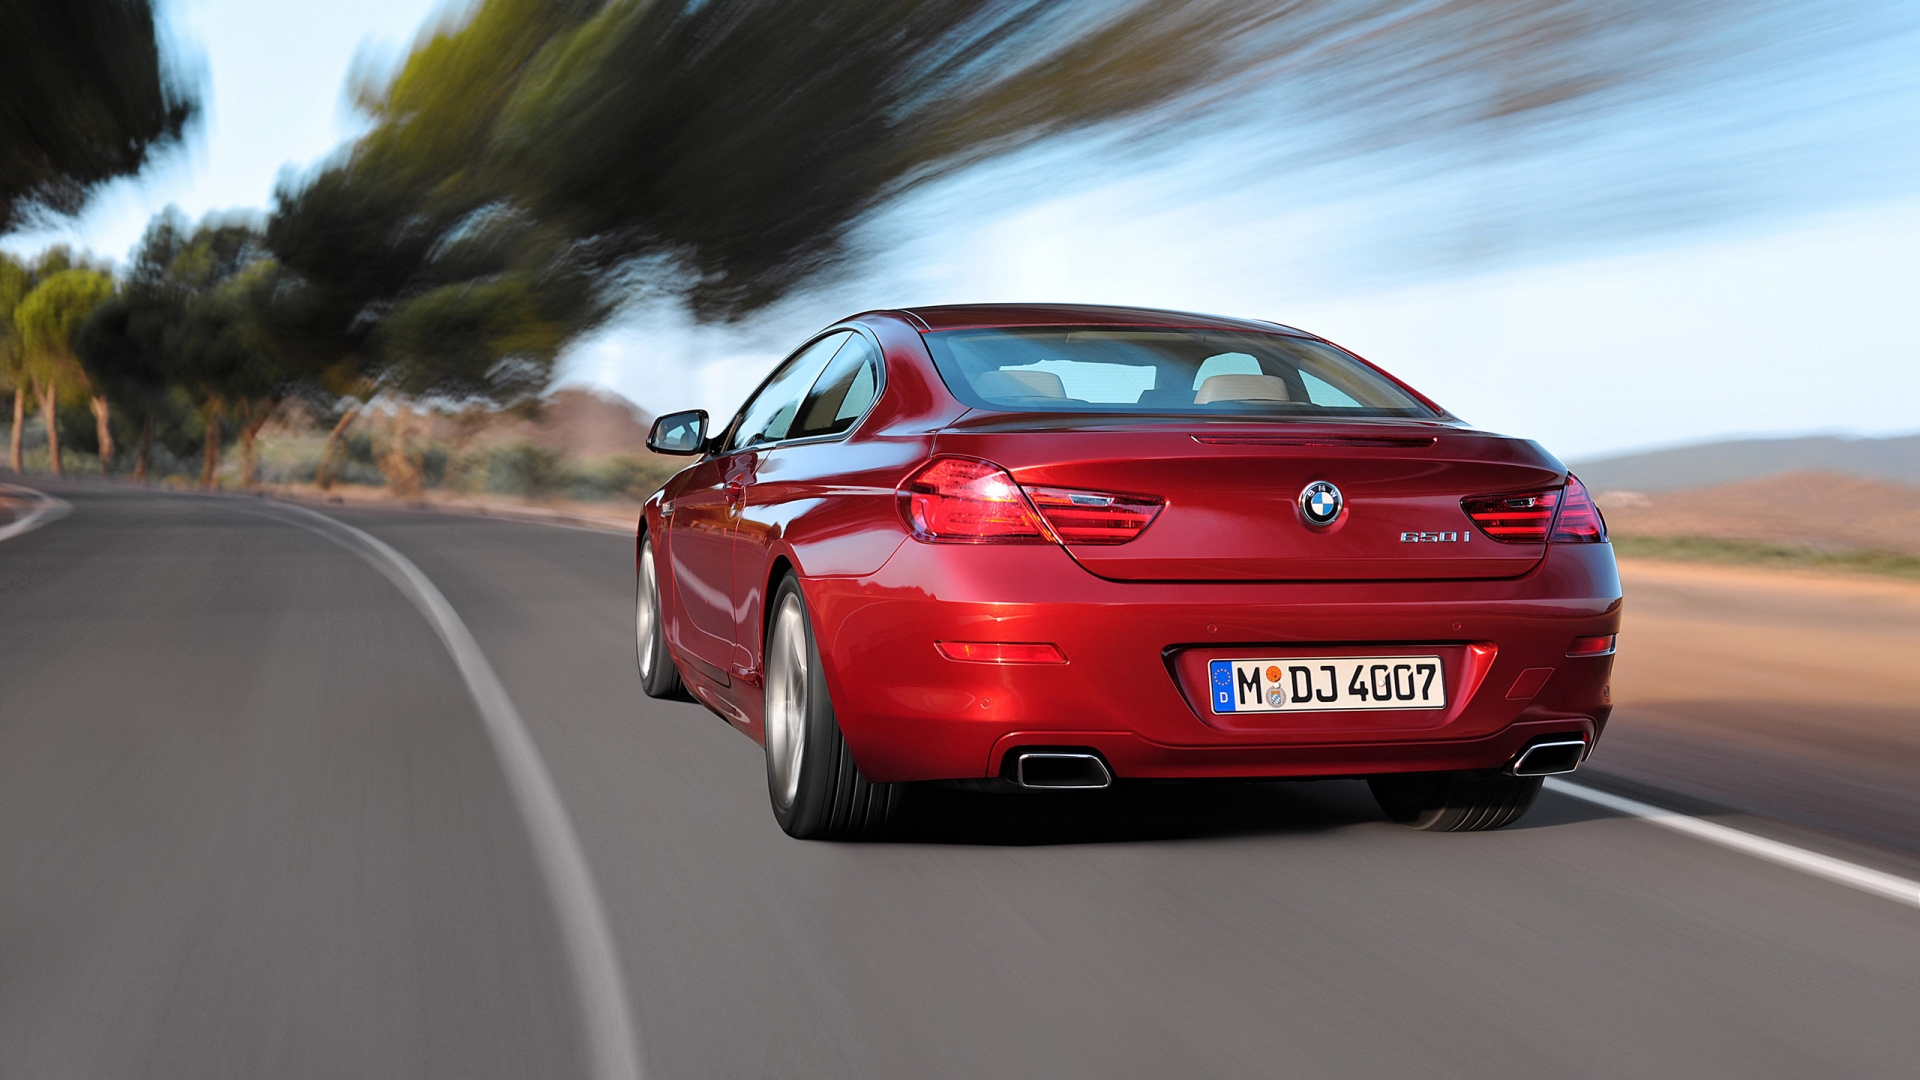 BMW 650i Coupe Rear for 1920 x 1080 HDTV 1080p resolution